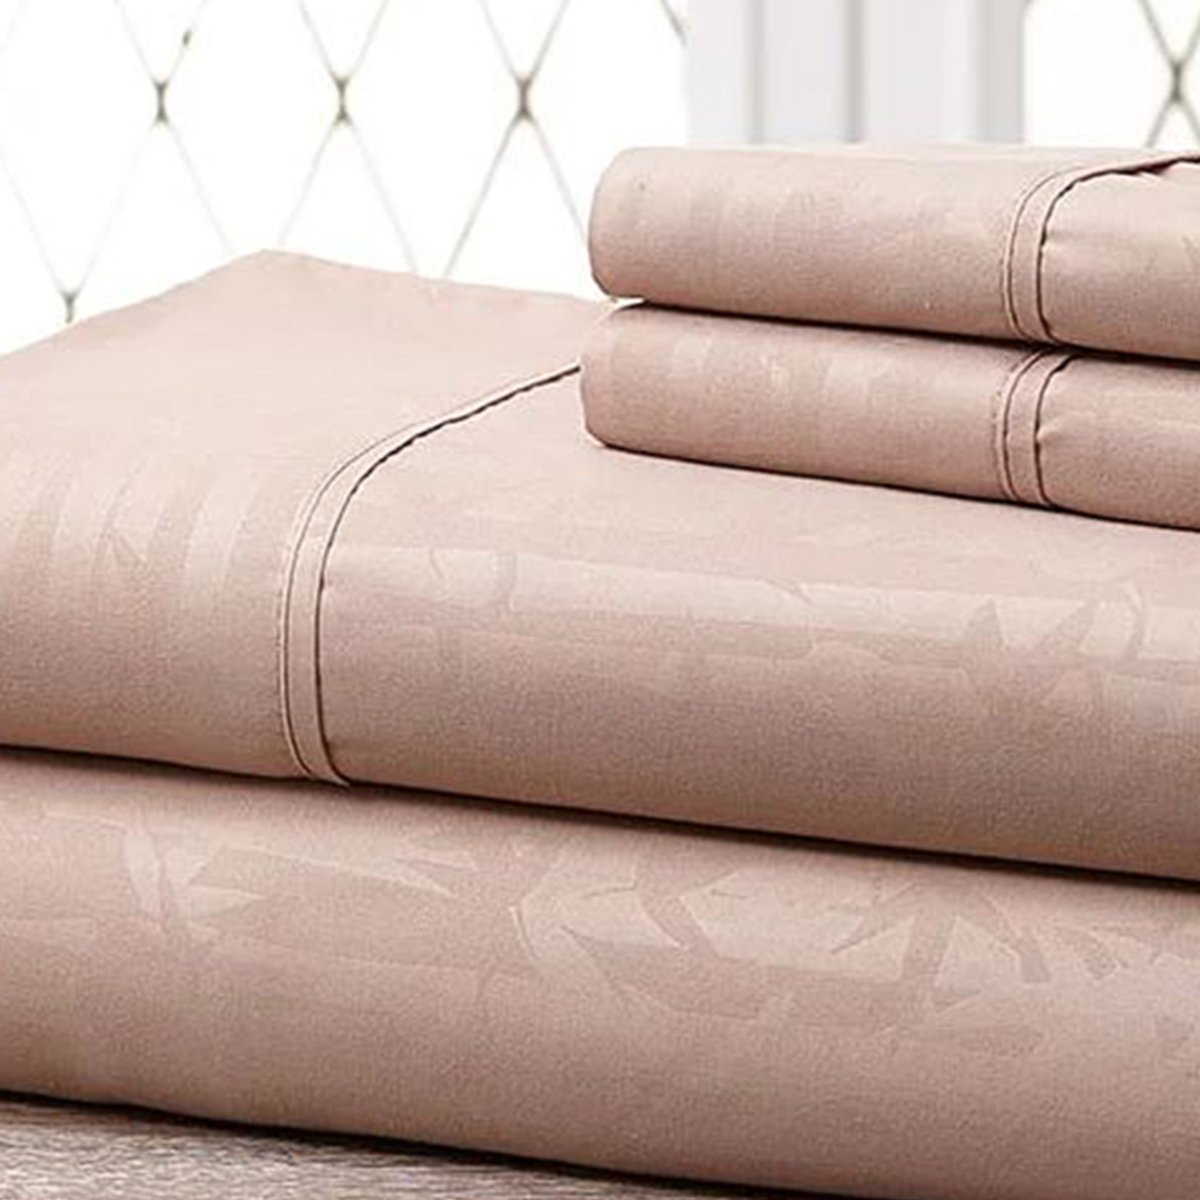 Super-soft 1600 Series Bamboo Embossed Bed Sheet, Taupe - Full, 4 Piece